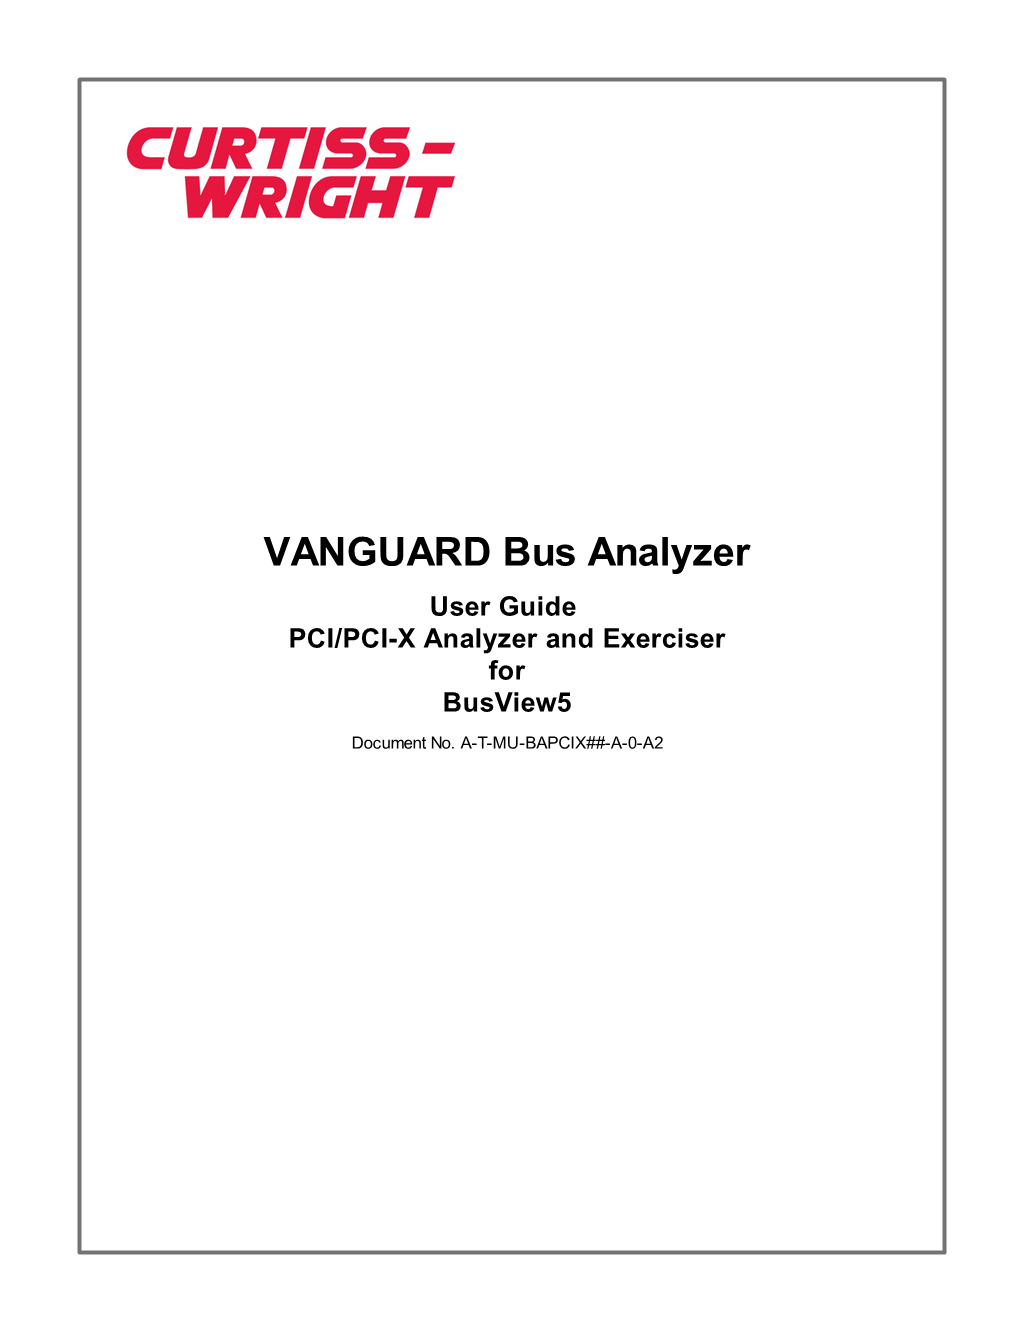 VANGUARD Bus Analyzer User Guide PCI/PCI-X Analyzer and Exerciser for Busview5 Document No